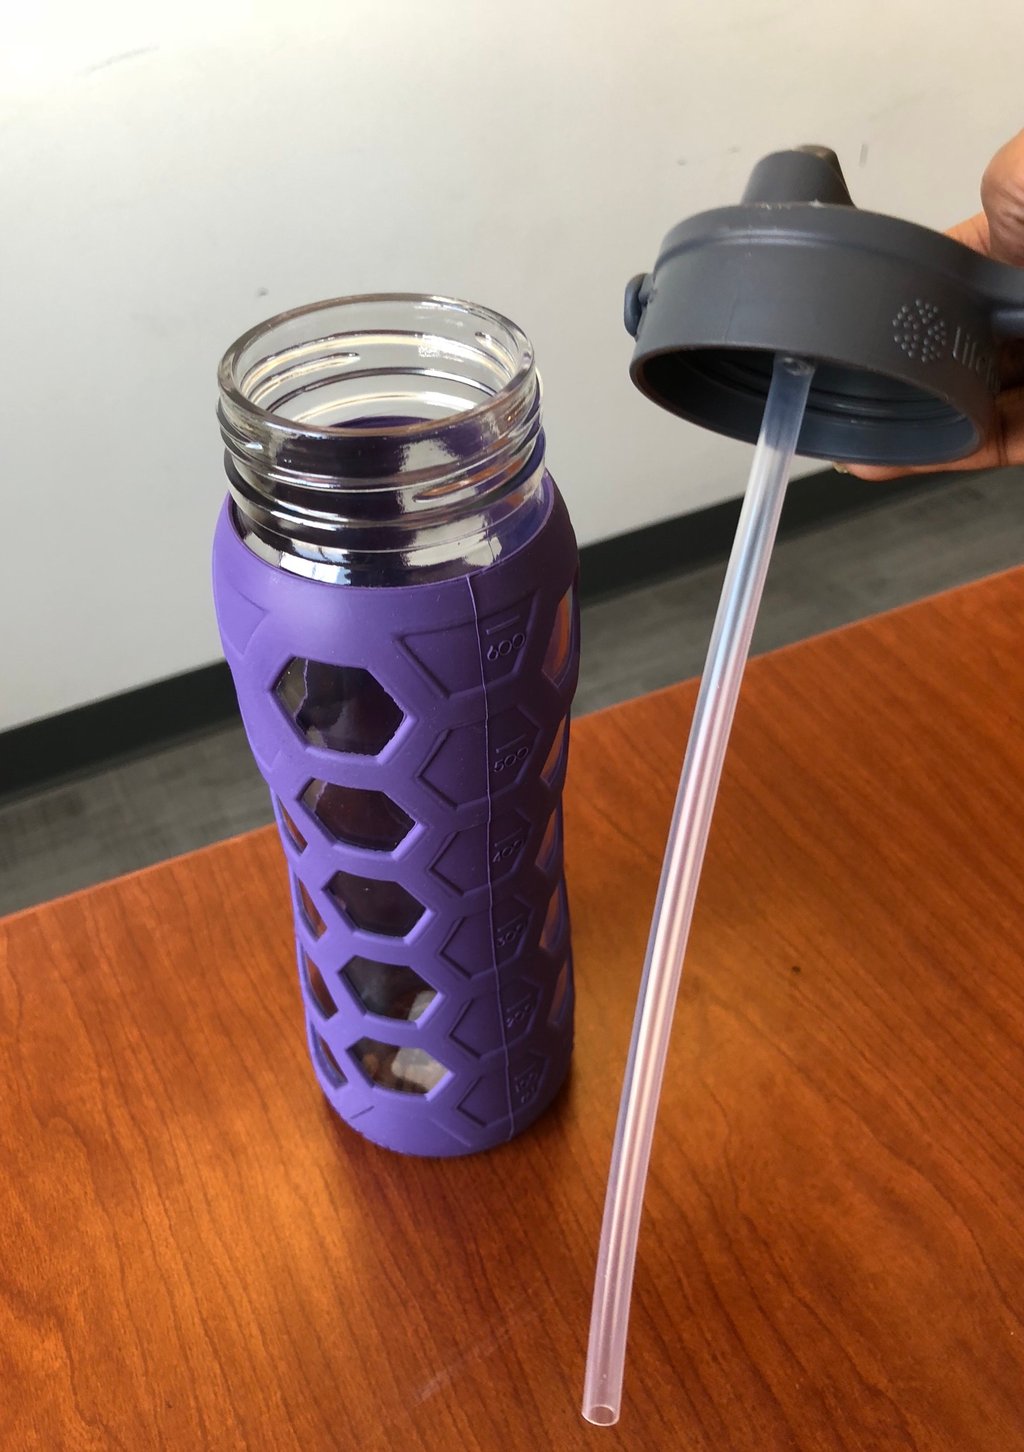 How to Clean my Reusable Water Bottle? - Just Bottle – Just Bottle